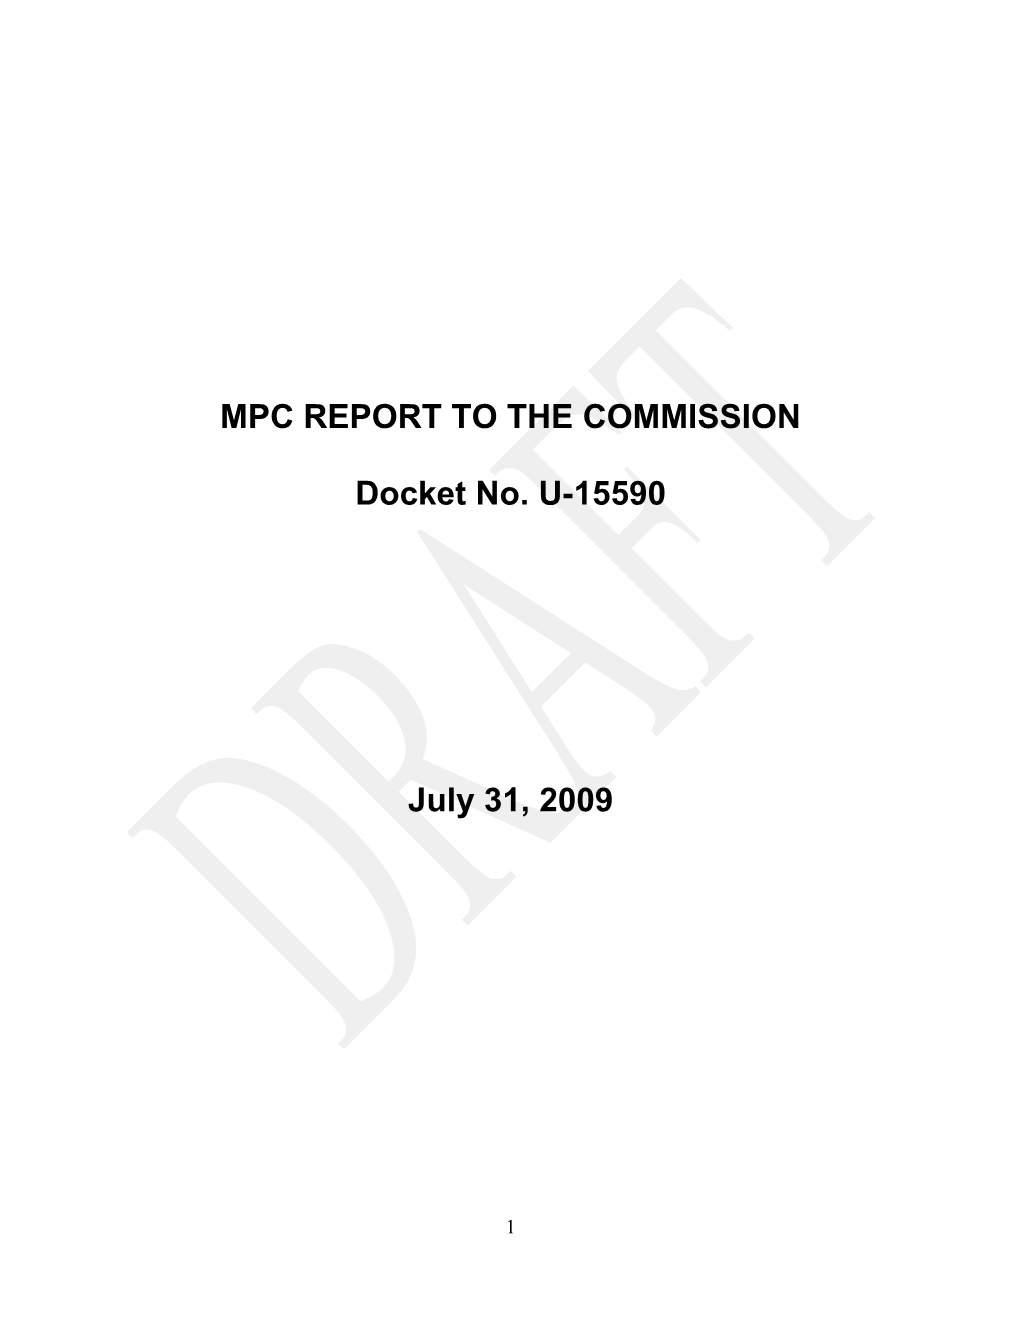 In July 2008, the Michigan Public Service Commission (MPSC) Issued an Order in Case No